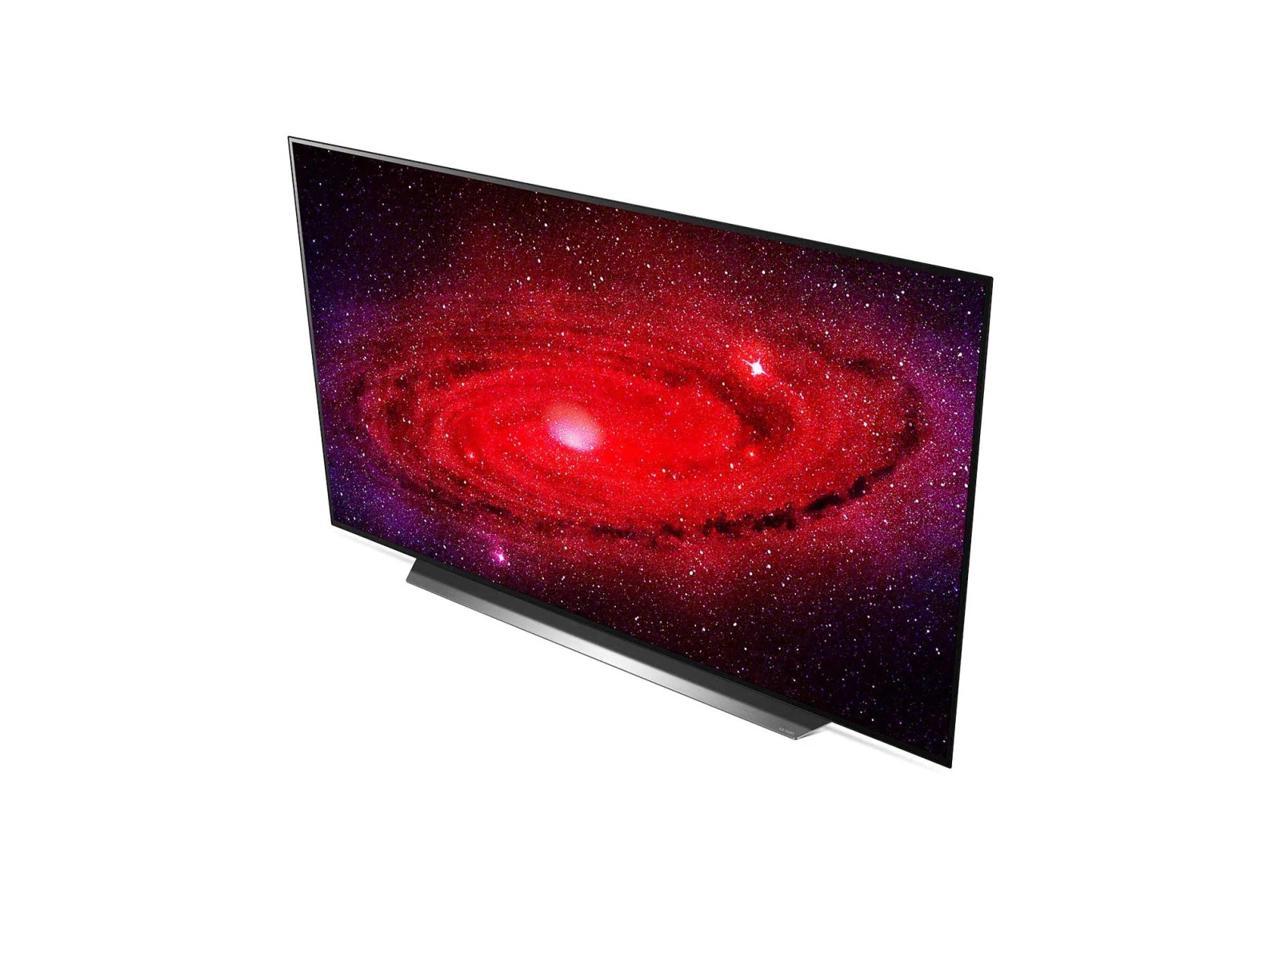 lg oled tv power on time